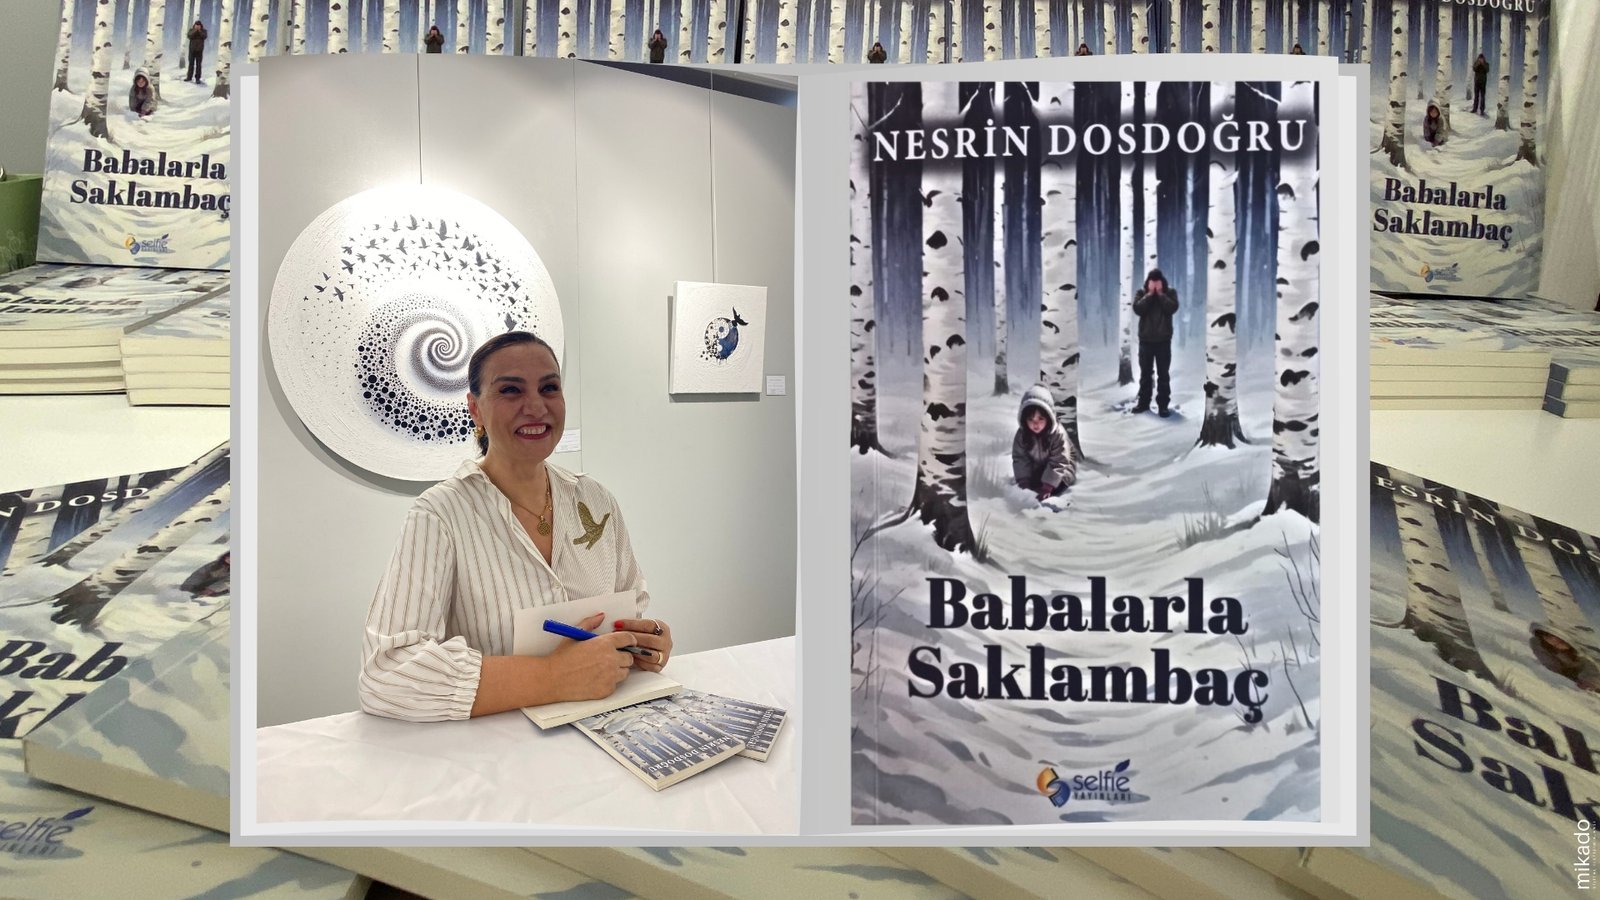 Power Of Literature At Evolution Art Gallery Book Signing Event For Nesrin Dosdoğru's 'hide And Seek With Fathers'